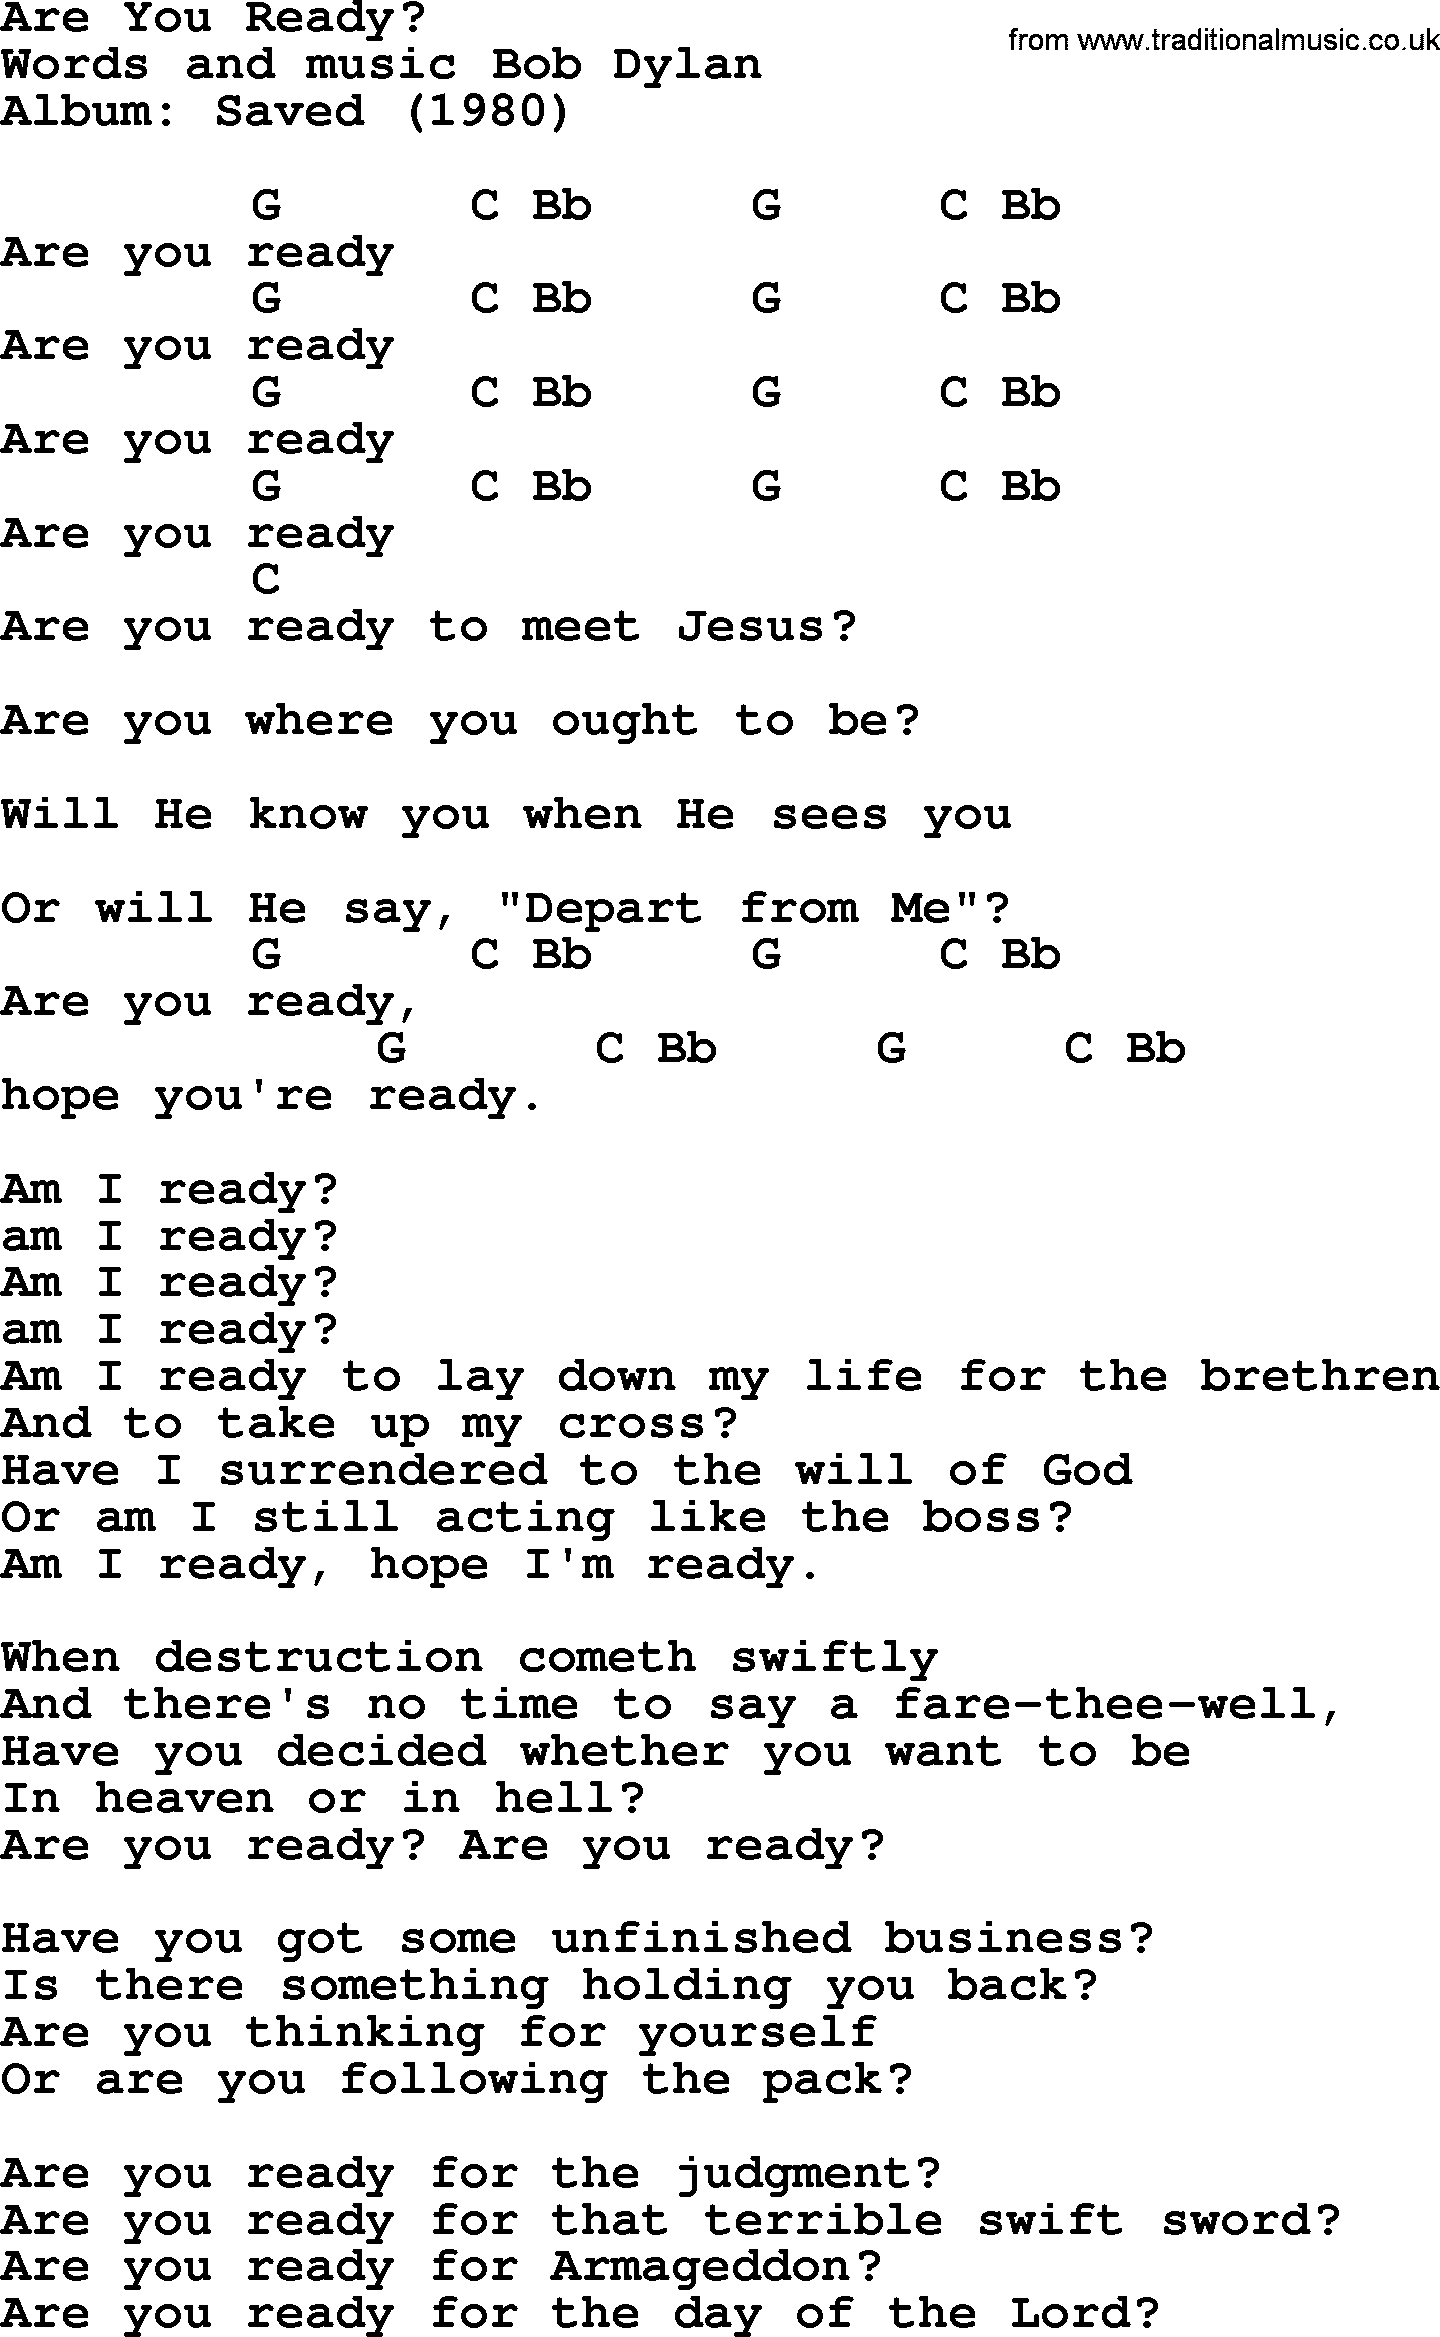 Bob Dylan song, lyrics with chords - Are You Ready